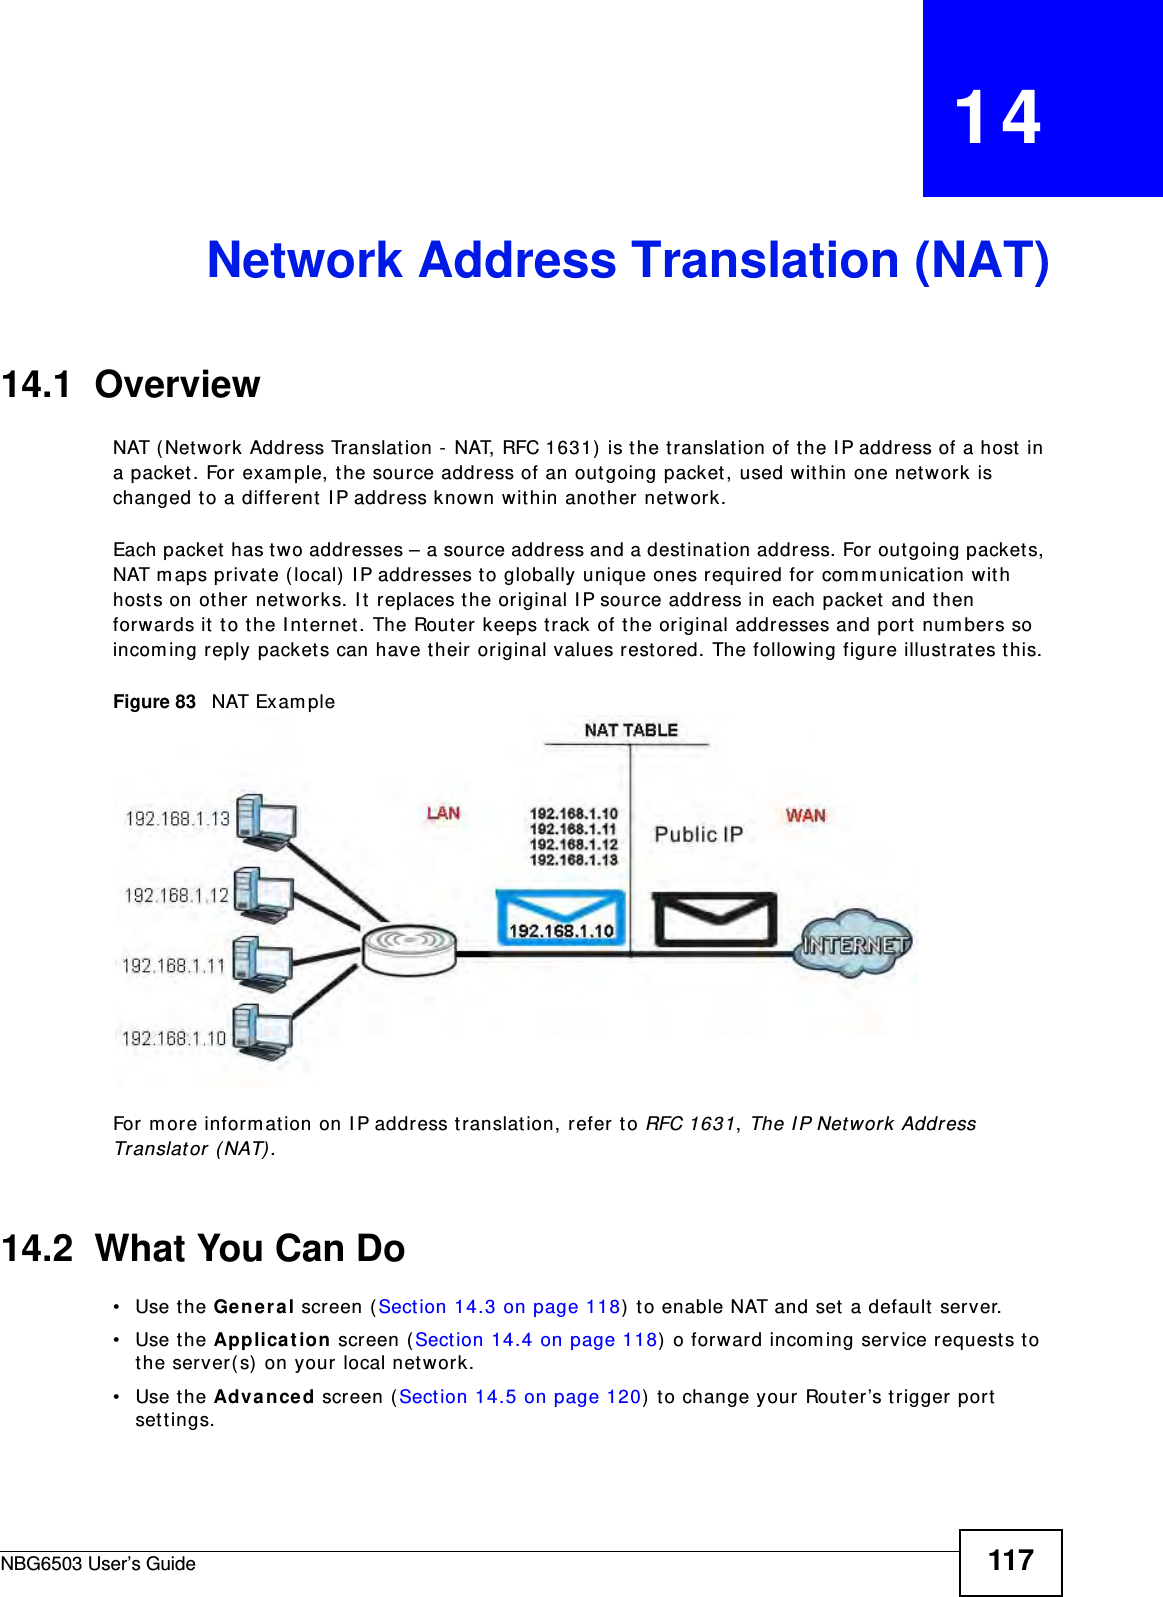 NBG6503 User’s Guide 117CHAPTER   14Network Address Translation (NAT)14.1  Overview   NAT (Network Address Translation - NAT, RFC 1631) is the translation of the IP address of a host in a packet. For example, the source address of an outgoing packet, used within one network is changed to a different IP address known within another network.Each packet has two addresses – a source address and a destination address. For outgoing packets, NAT maps private (local) IP addresses to globally unique ones required for communication with hosts on other networks. It replaces the original IP source address in each packet and then forwards it to the Internet. The Router keeps track of the original addresses and port numbers so incoming reply packets can have their original values restored. The following figure illustrates this.Figure 83   NAT ExampleFor more information on IP address translation, refer to RFC 1631, The IP Network Address Translator (NAT).14.2  What You Can Do•Use the General screen (Section 14.3 on page 118) to enable NAT and set a default server.•Use the Application screen (Section 14.4 on page 118) o forward incoming service requests to the server(s) on your local network.•Use the Advanced screen (Section 14.5 on page 120) to change your Router’s trigger port settings.